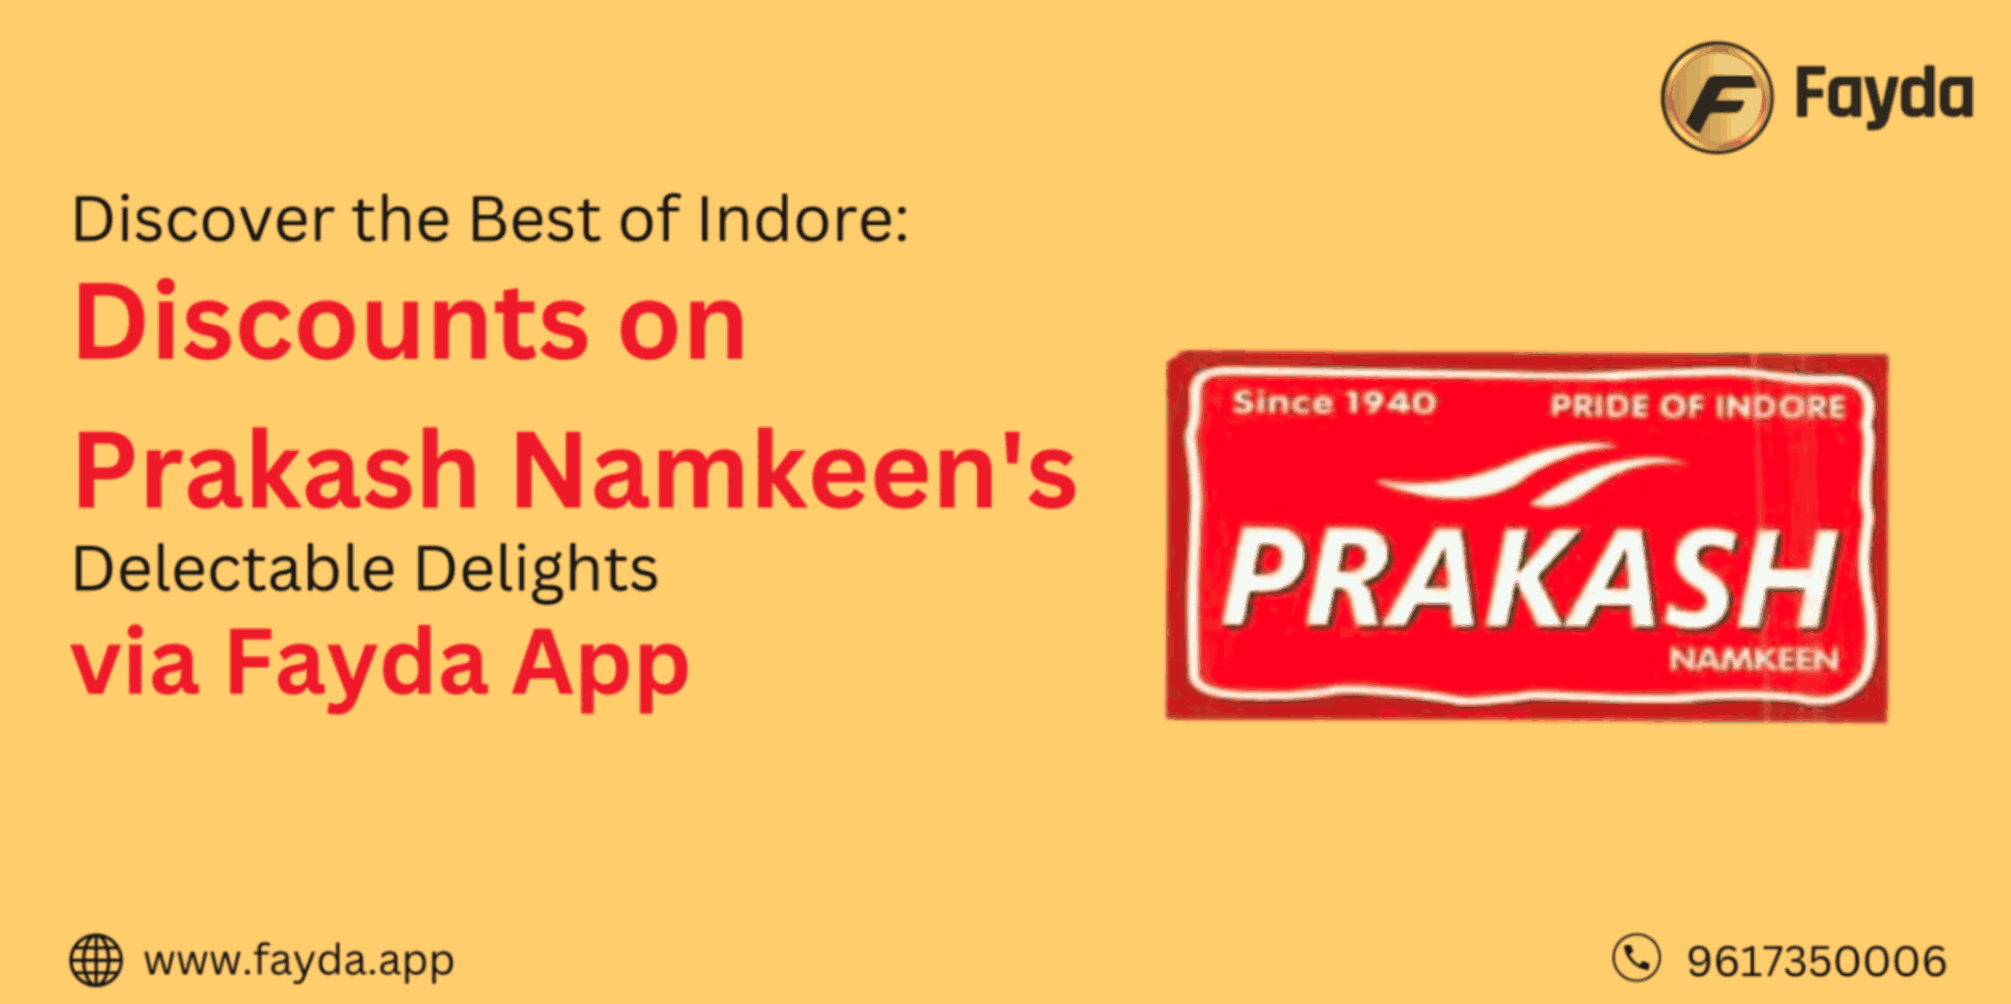 Discover the Best of Indore: Discounts on Prakash Namkeen's Delectable Delights via Fayda App